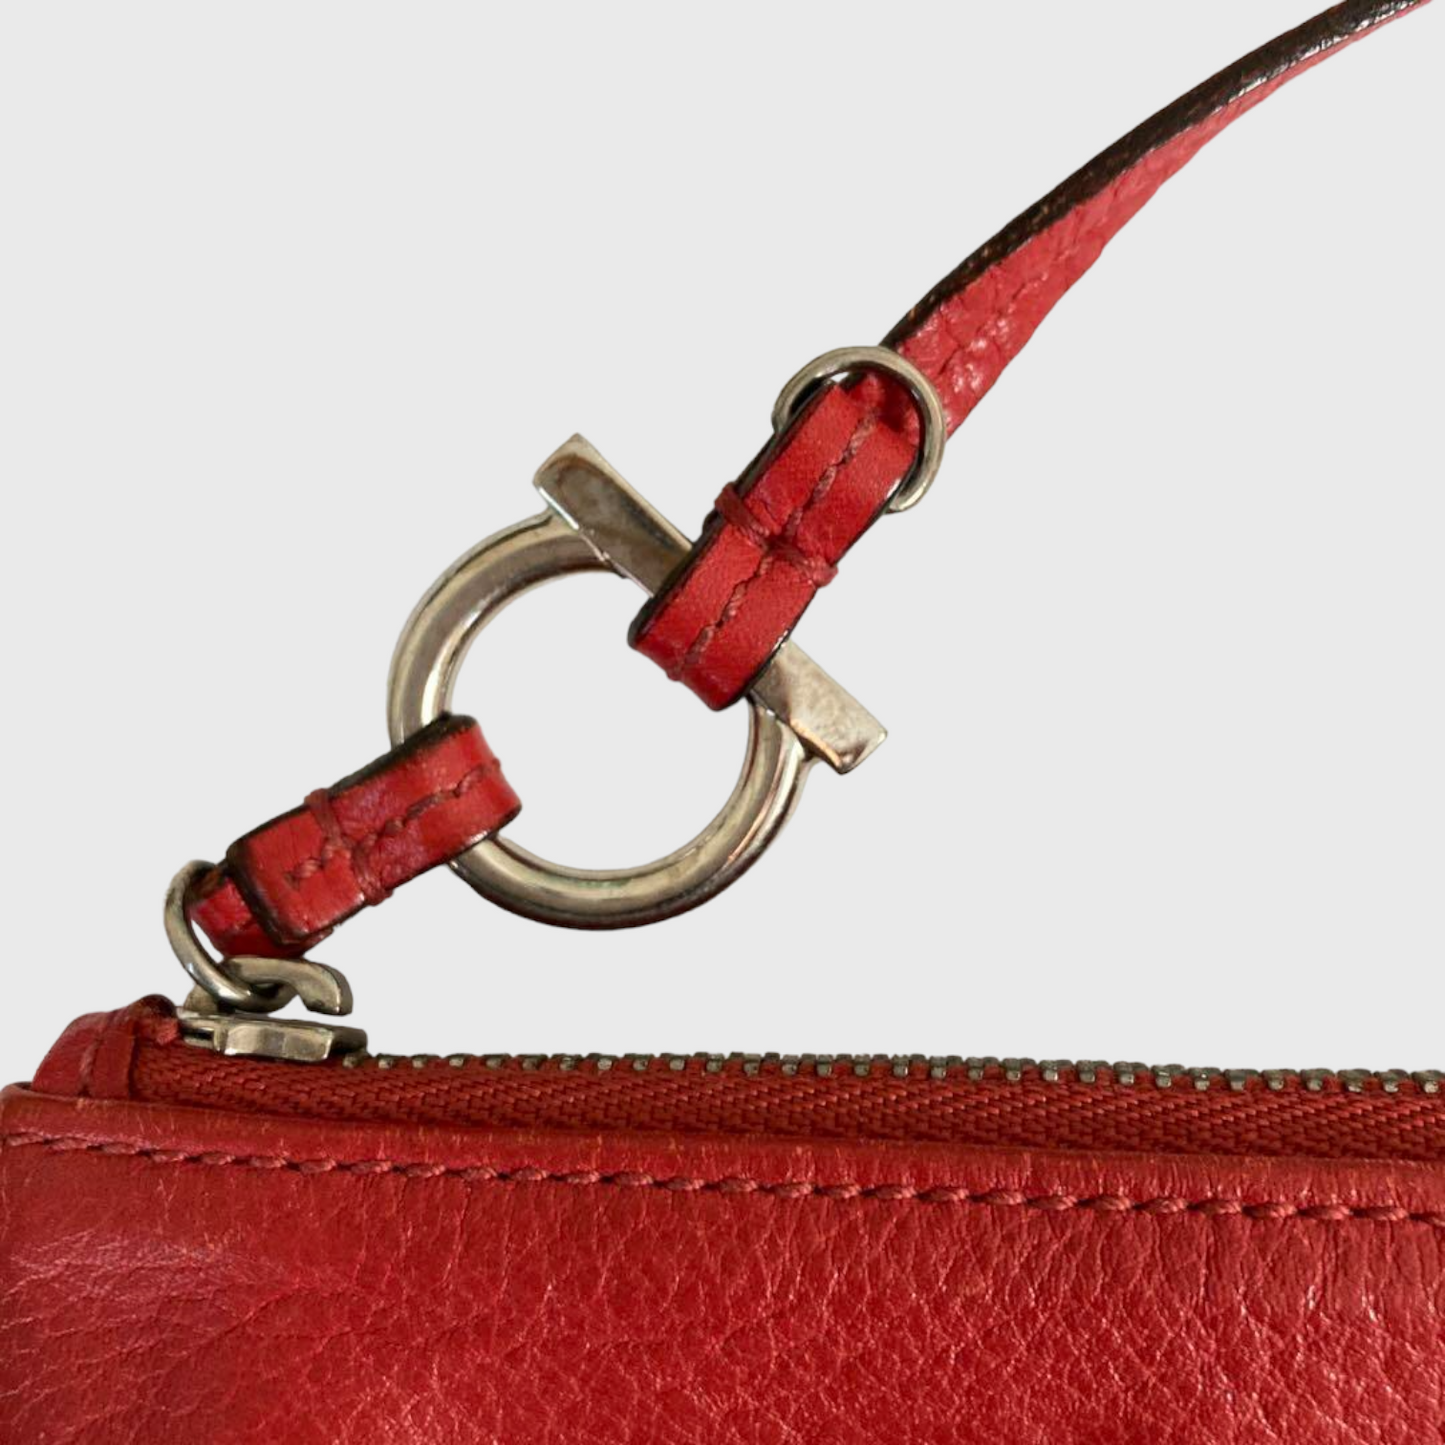 Vintage Vibrant Red Leather Pouch